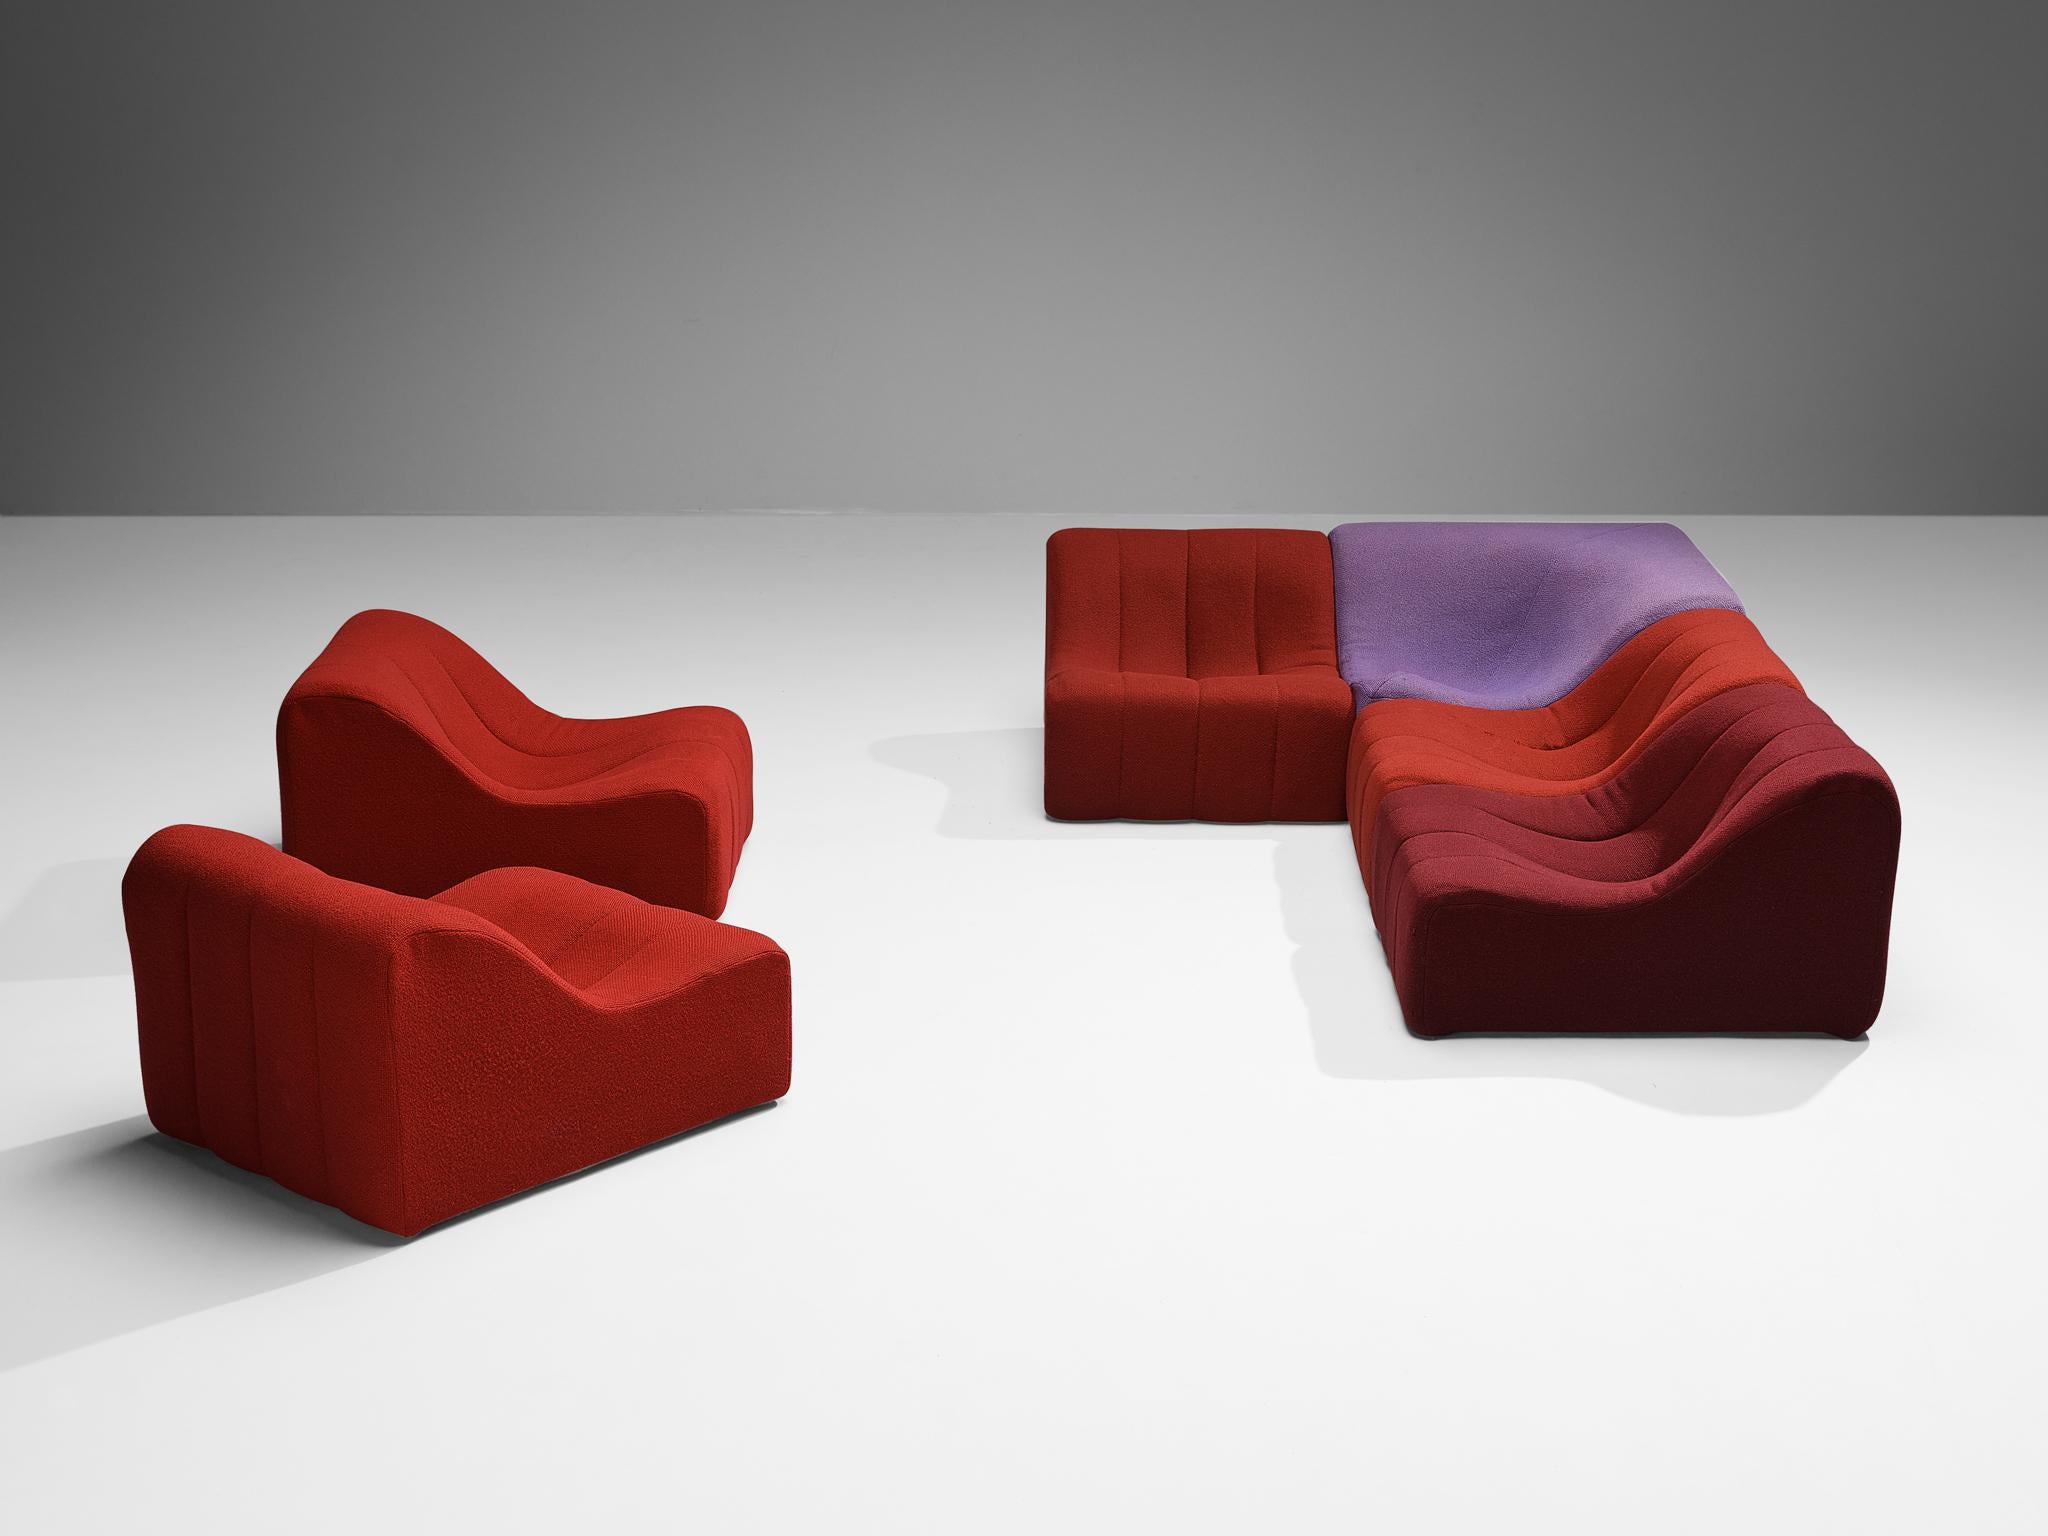 Late 20th Century Kwok Hoi Chan for Steiner 'Chromatic' Modular Sofa in Red Purple Colors  For Sale